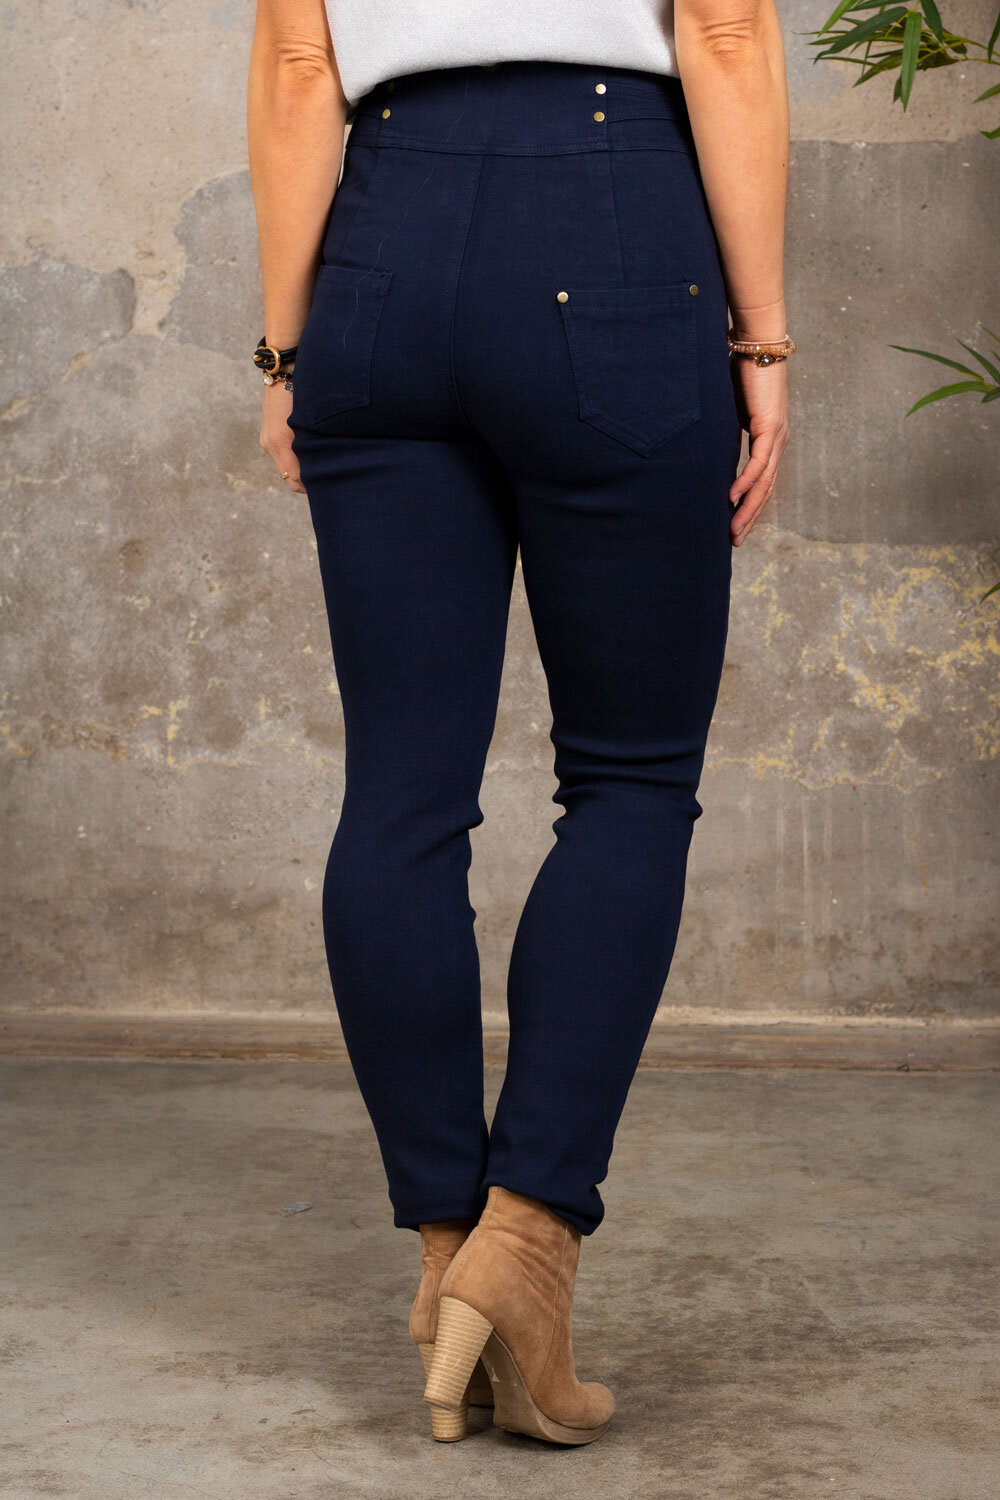 Trousers with Gold Details - NL83045 - Navy